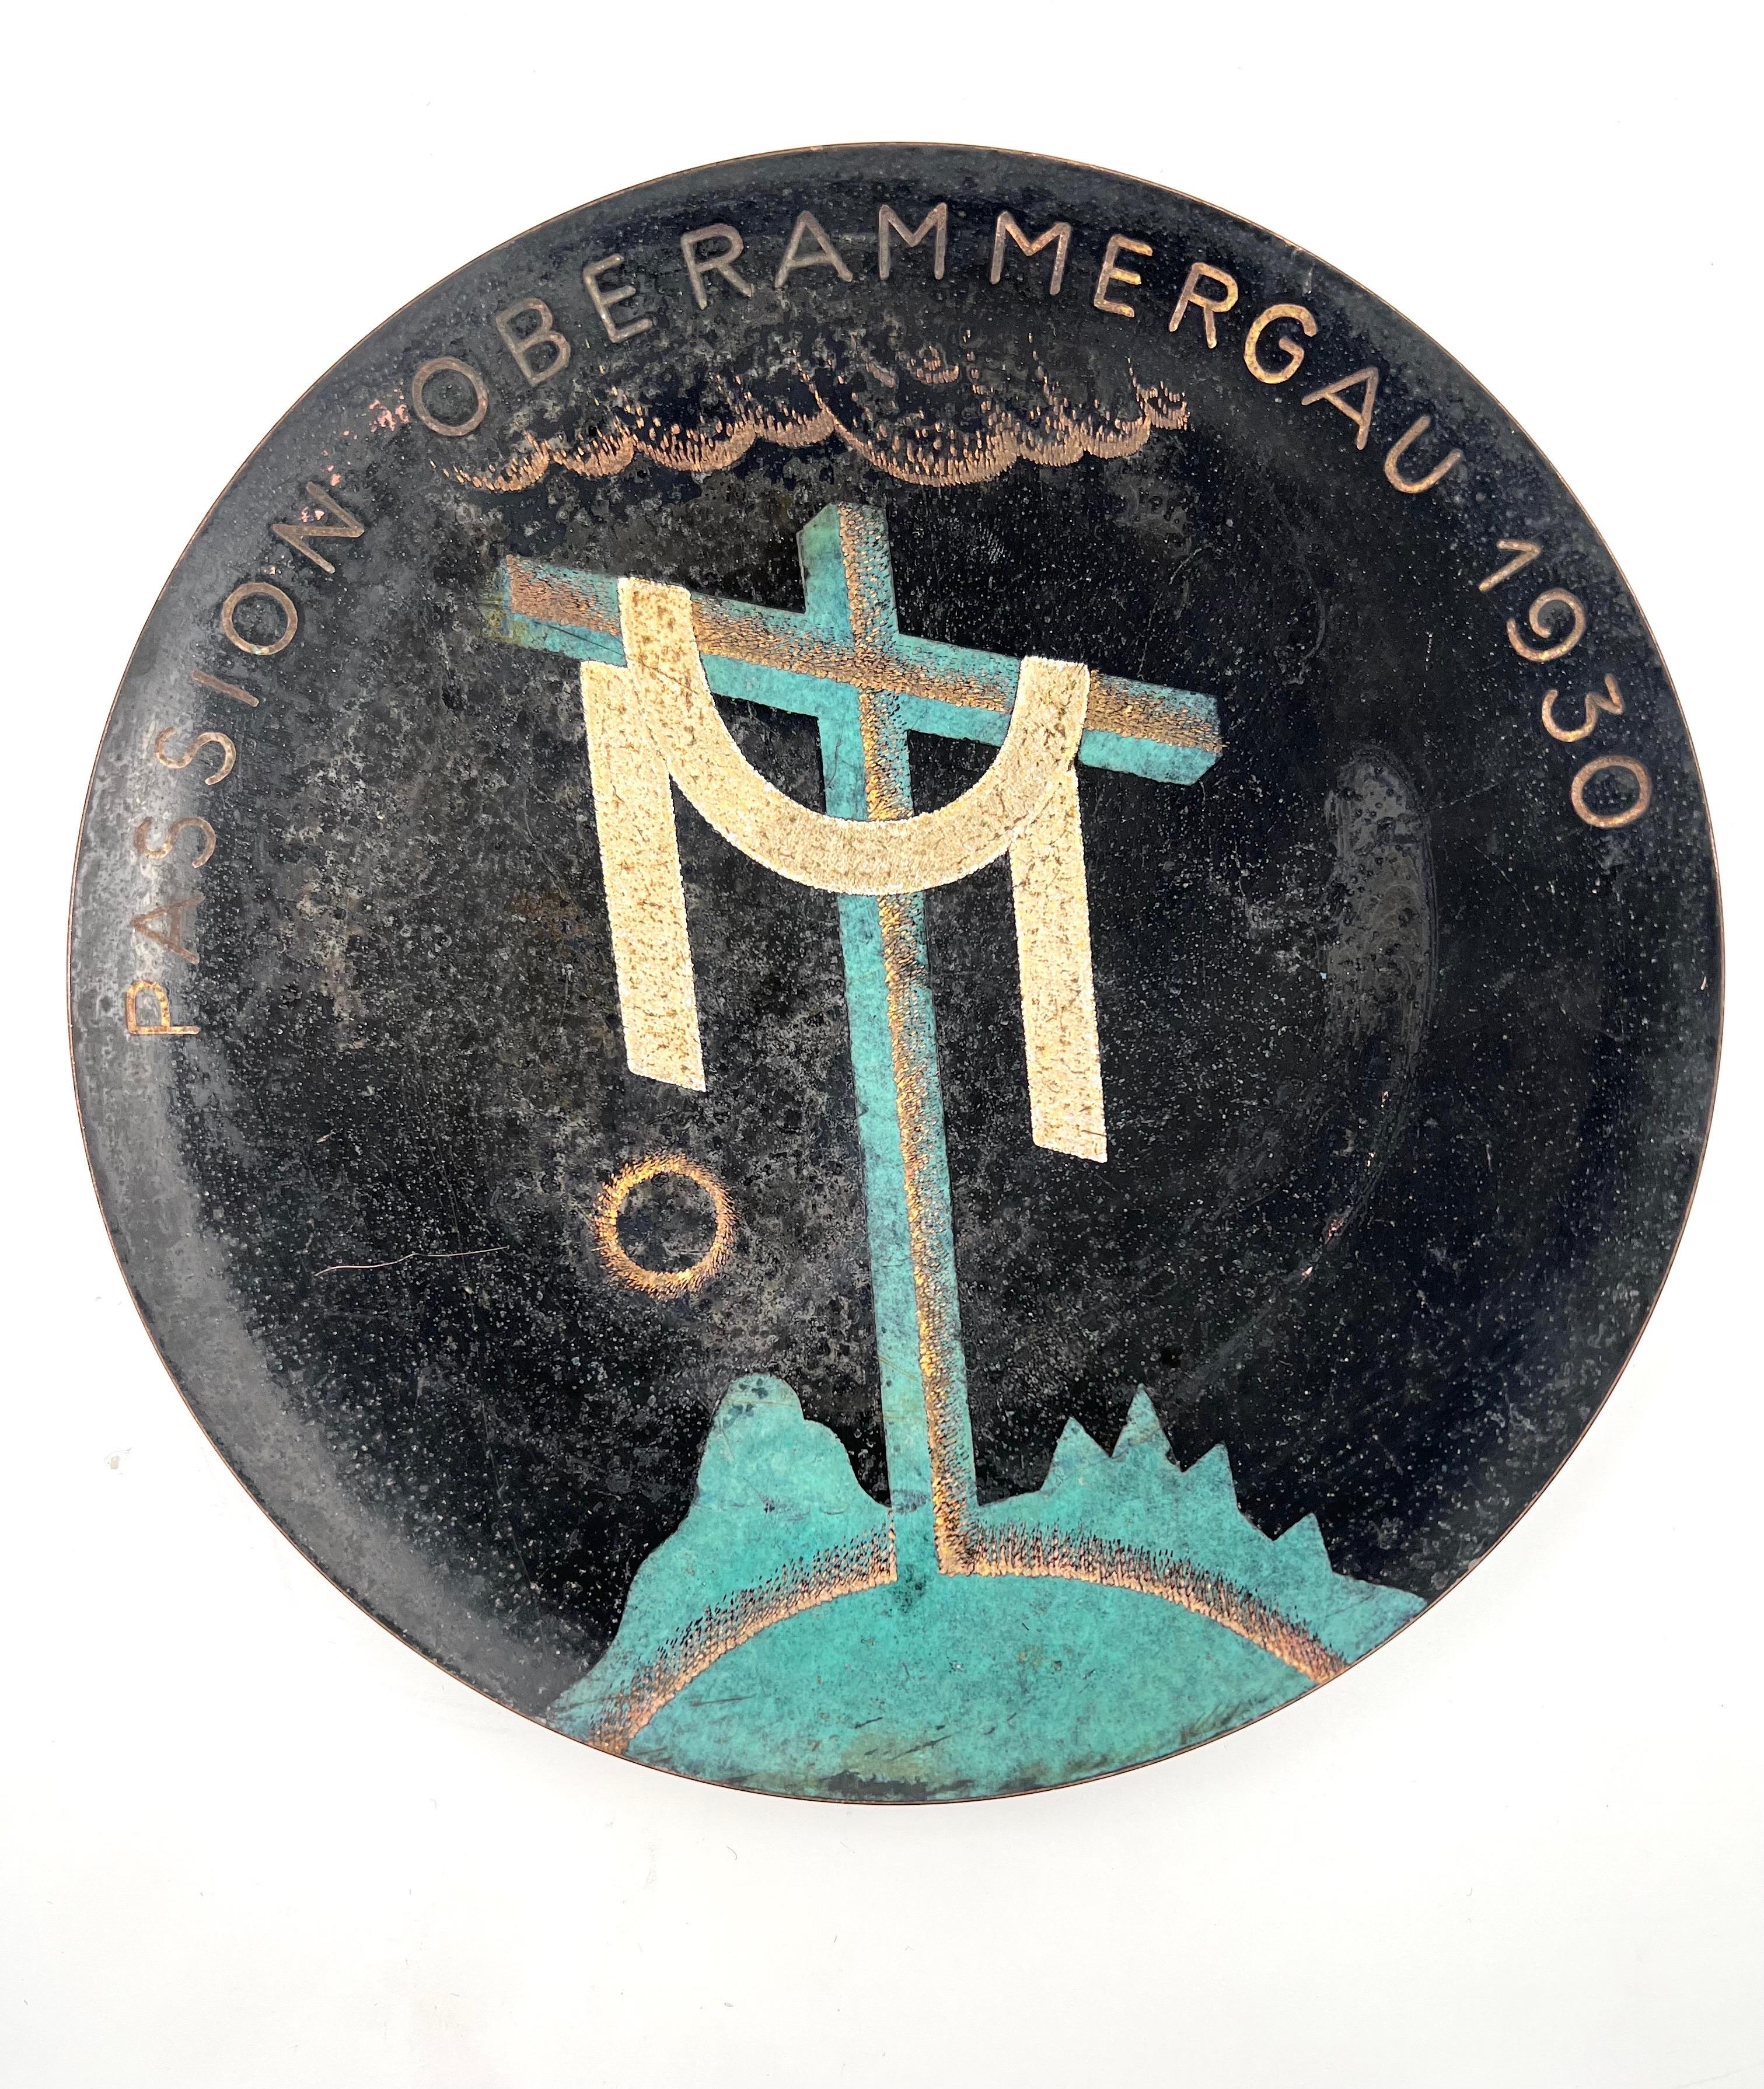 A very rare 1930s original decorative plate from the passion world-famous Oberammergau Town in Bavaria Germany. very nice original condition beautiful patina and rust due to age.